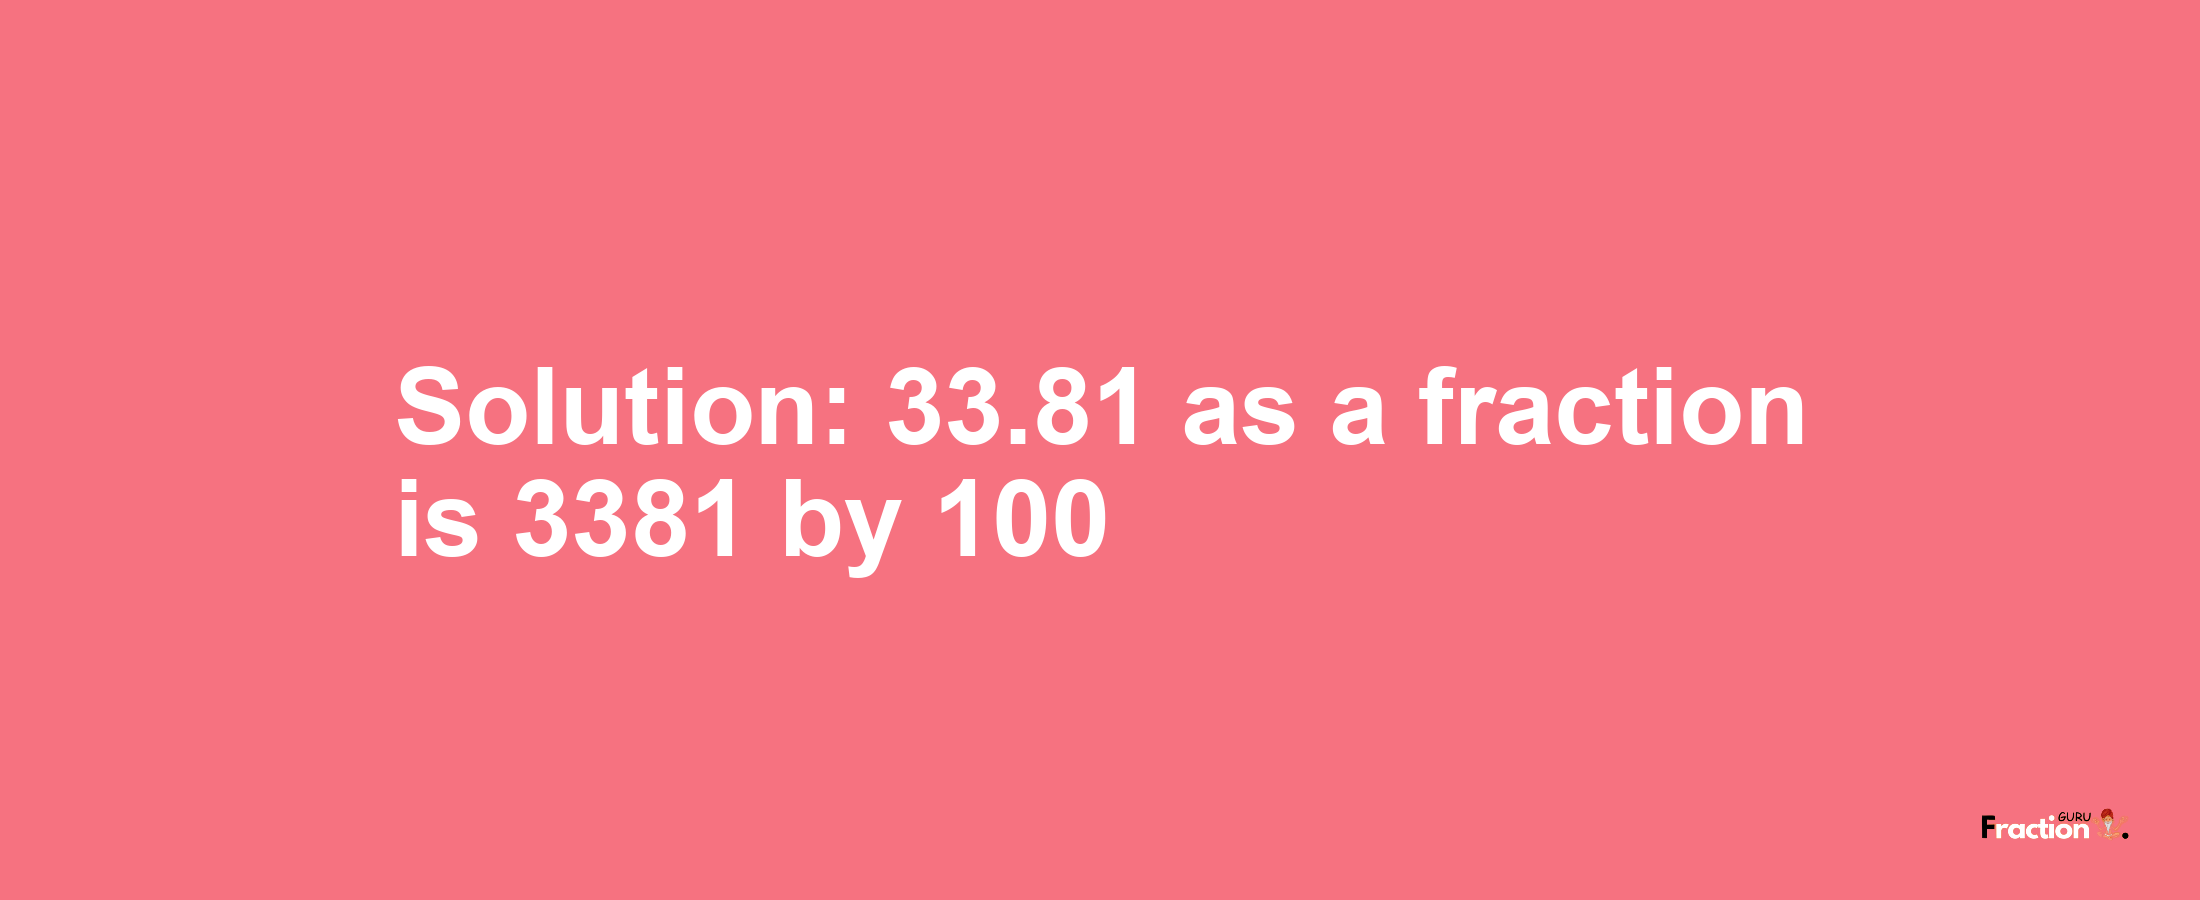 Solution:33.81 as a fraction is 3381/100